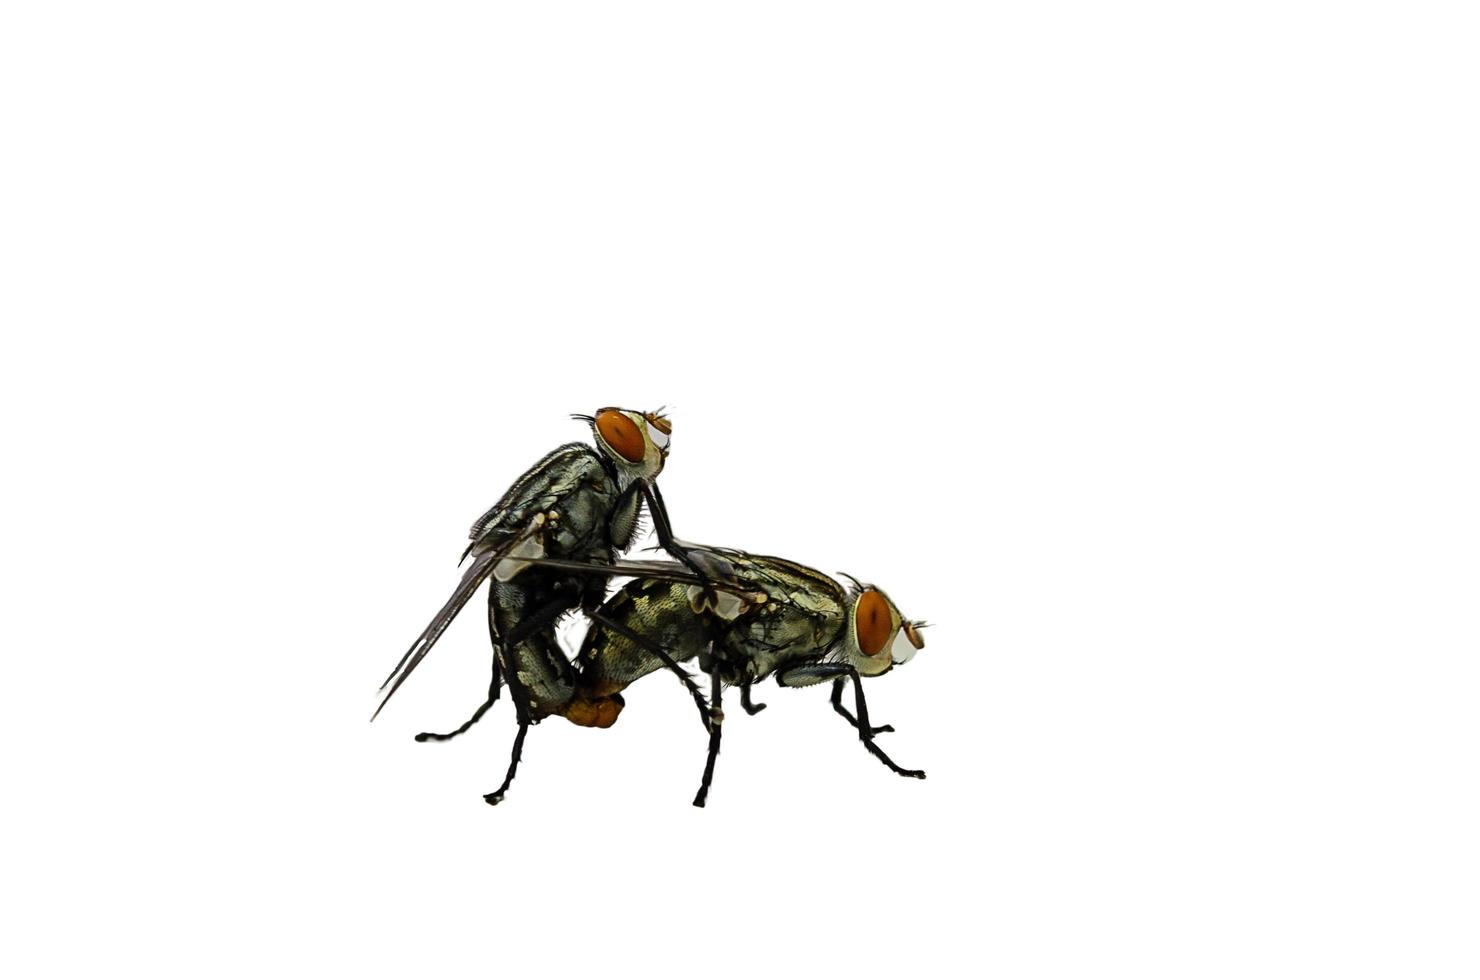 Mating flies on a white background photo